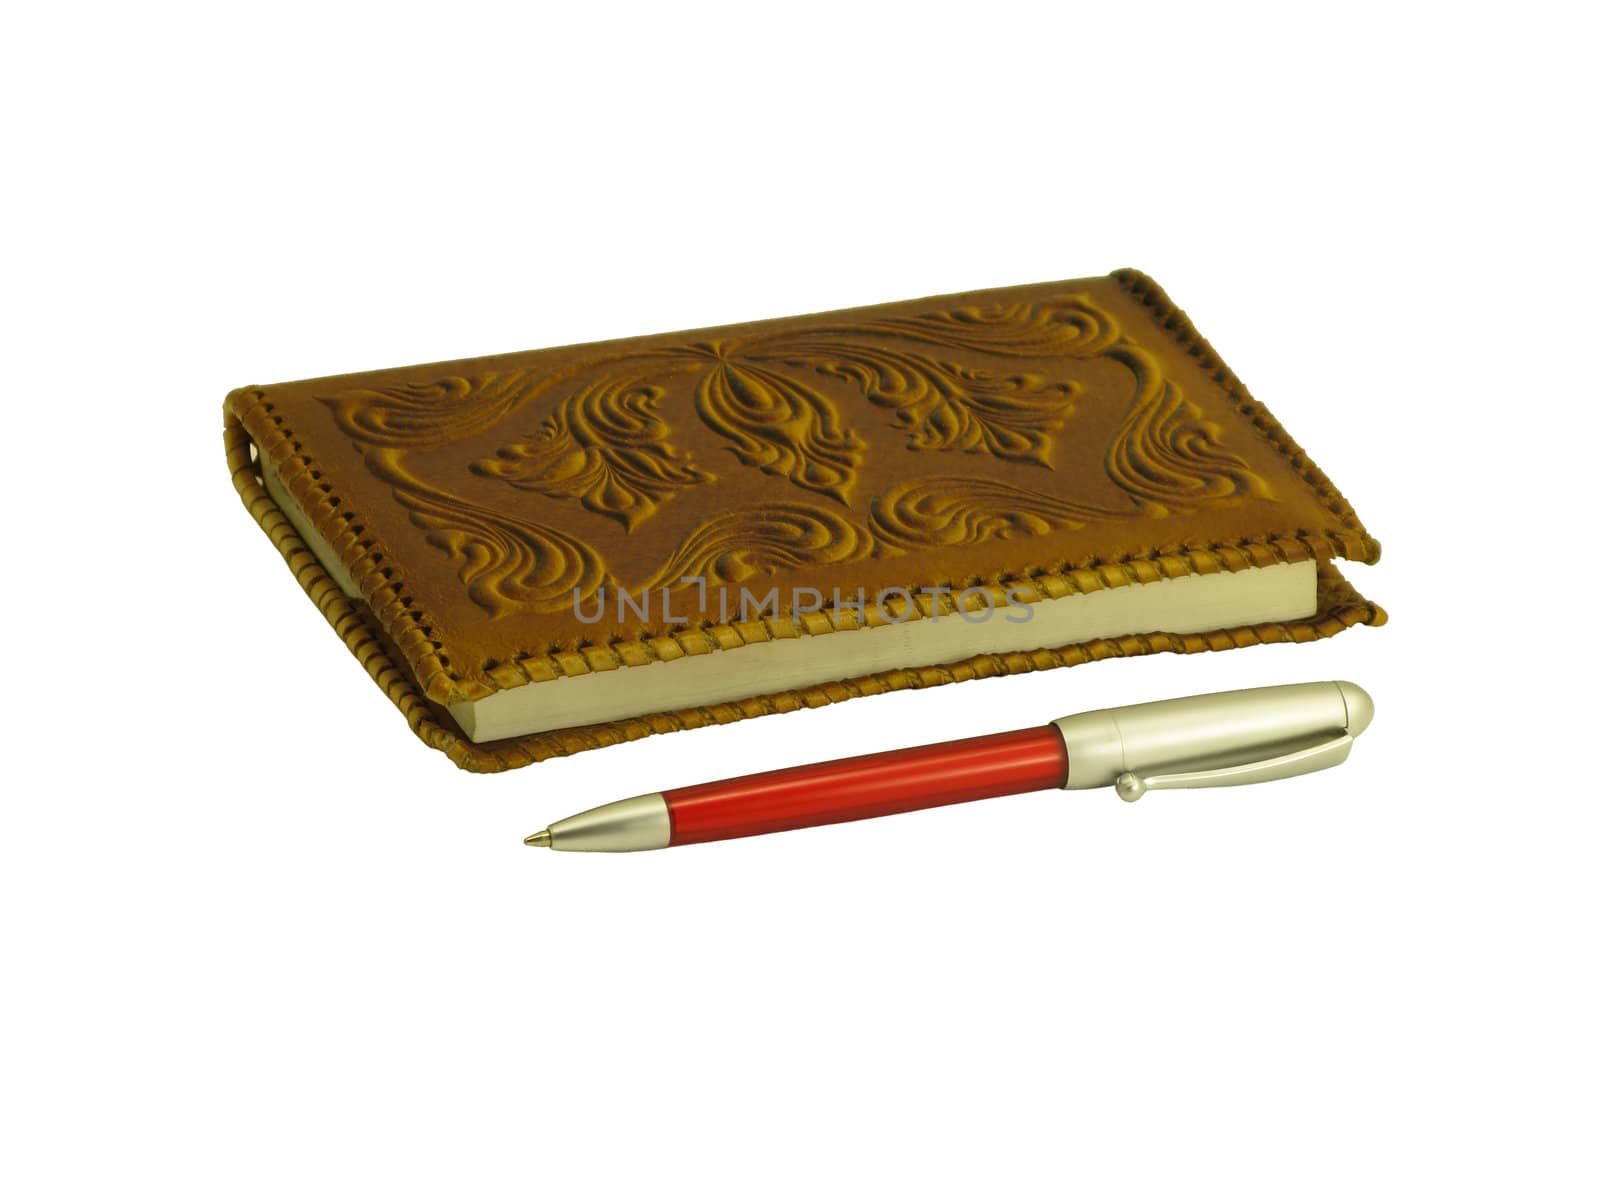 Brown soft leather covered notebook and a pen on a white background